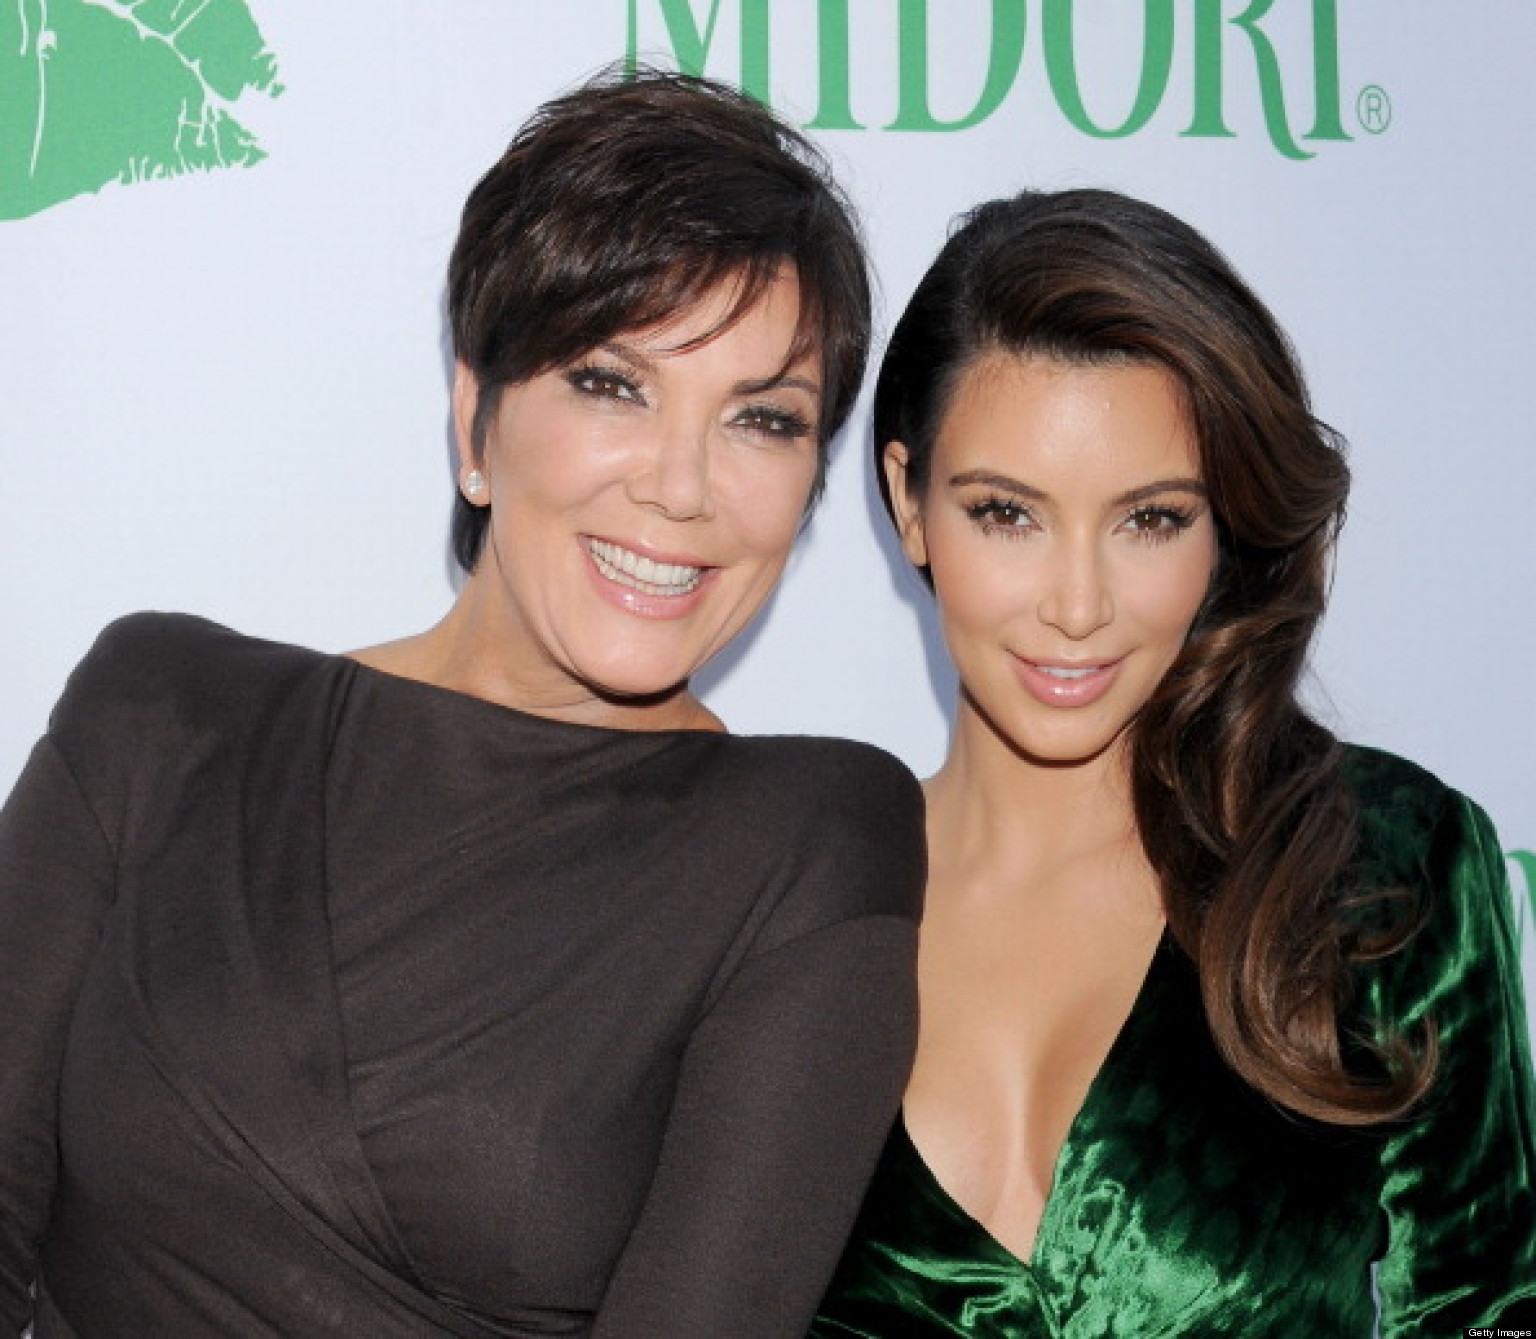 SANTA MONICA, CA - SEPTEMBER 25: Actors/TV personalities Kris Jenner and Kim Kardashian arrive at the Midori Makeover Parlour event at Fred Segal on September 25, 2012 in Santa Monica, California.  (Photo by Gregg DeGuire/WireImage)